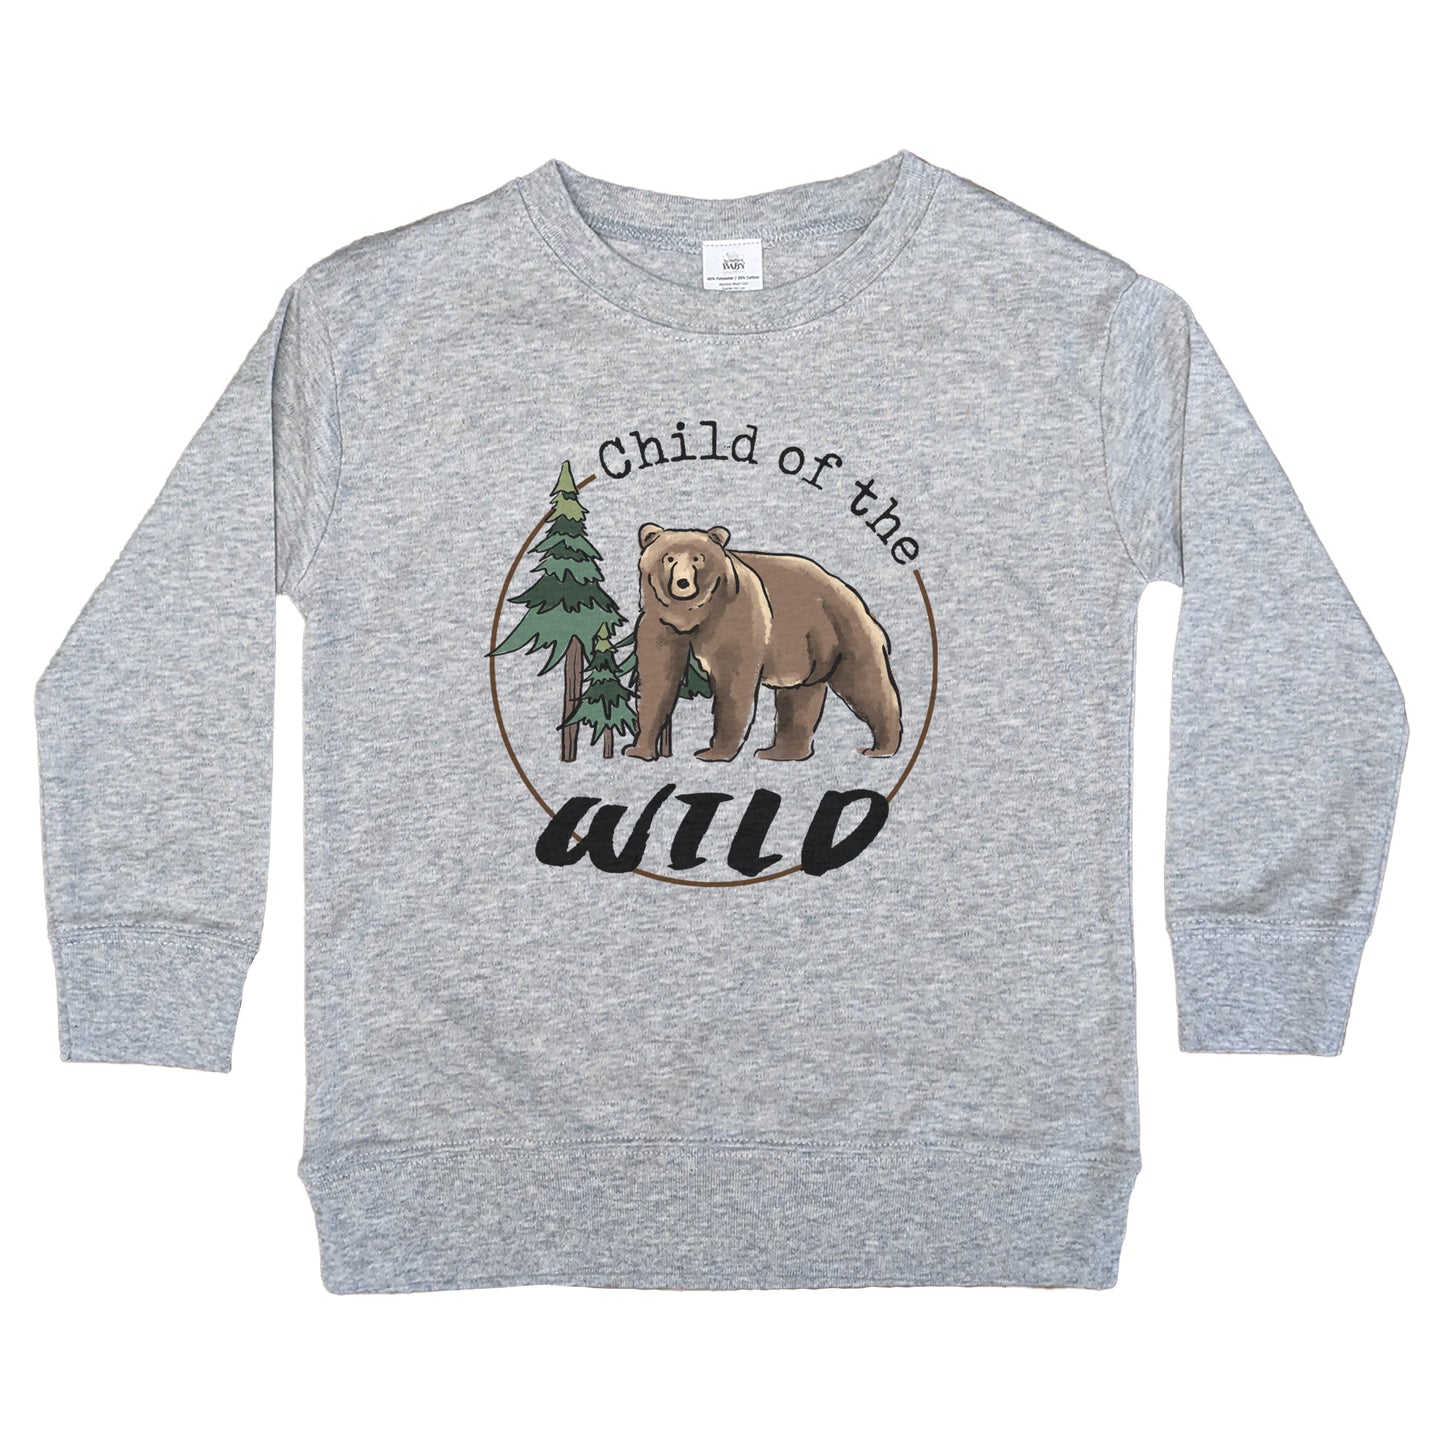 "Child of the wild" Bear Toddler/Youth grey Long Sleeve Shirt